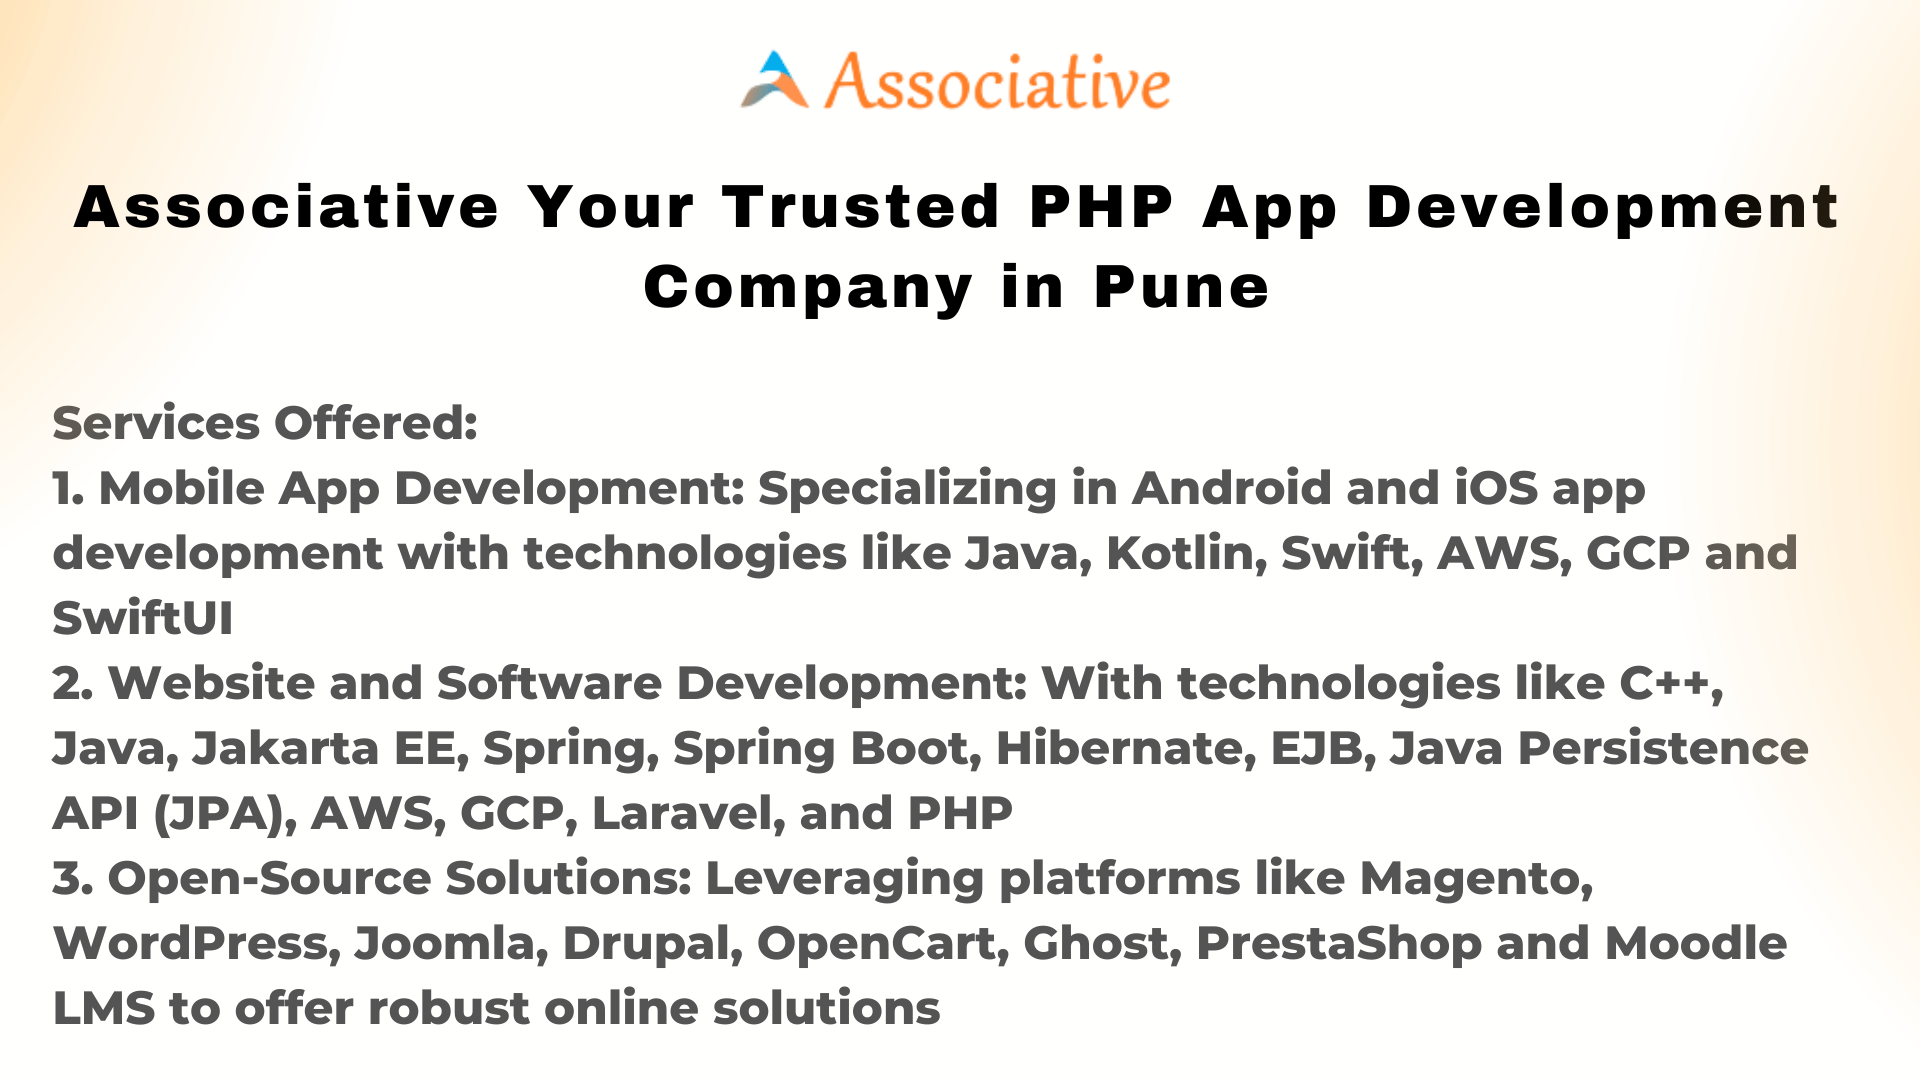 Associative Your Trusted PHP App Development Company in Pune